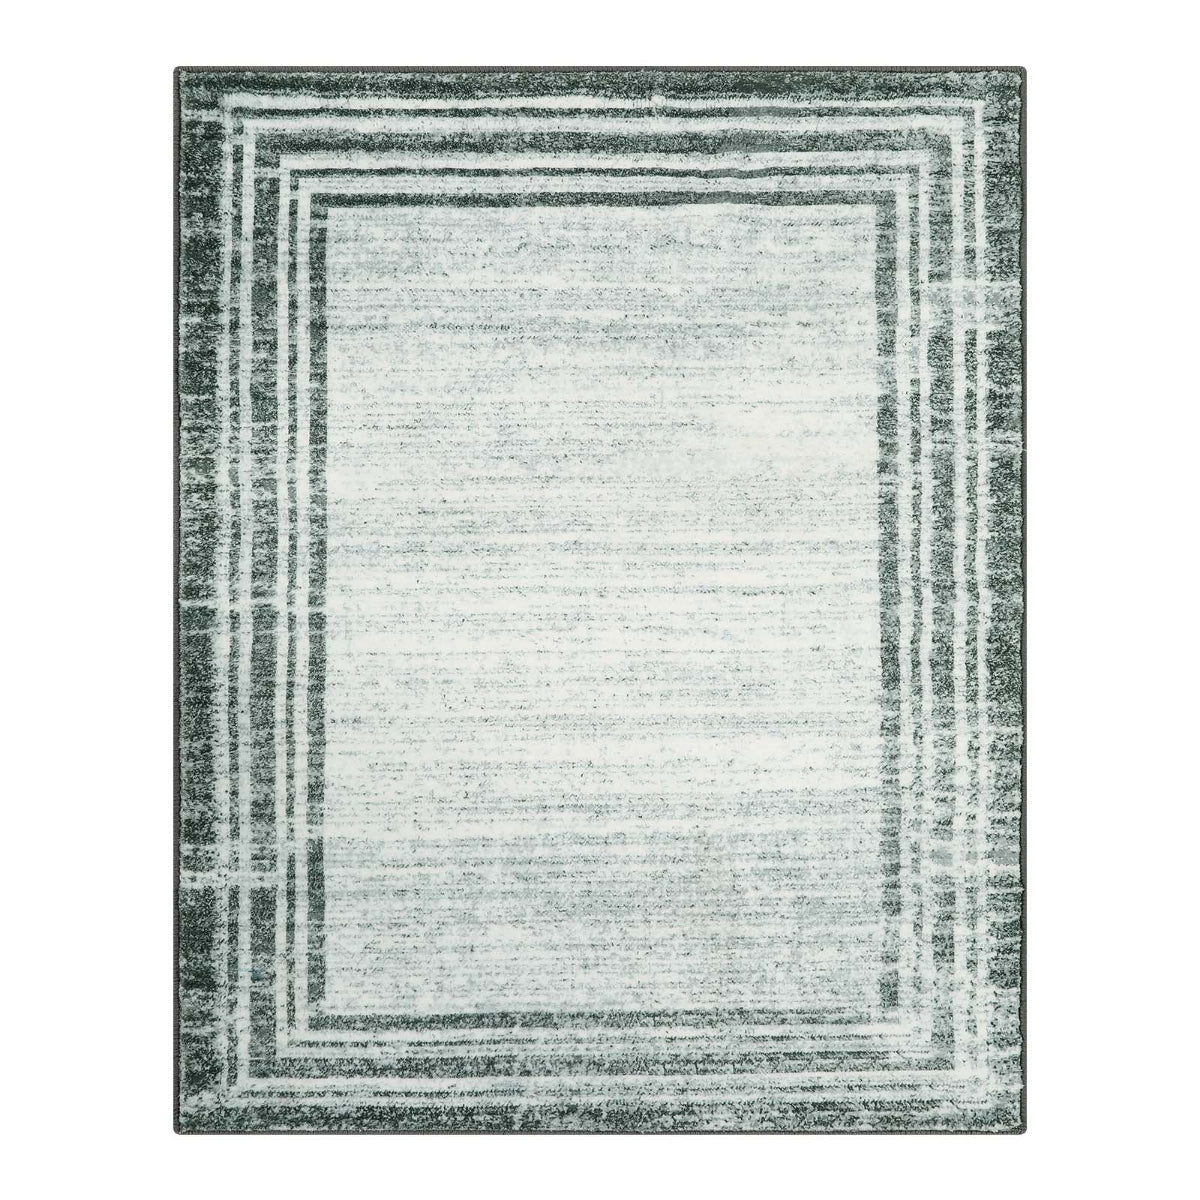 Modern Abstract Ombre Border Minimalist Area Rug